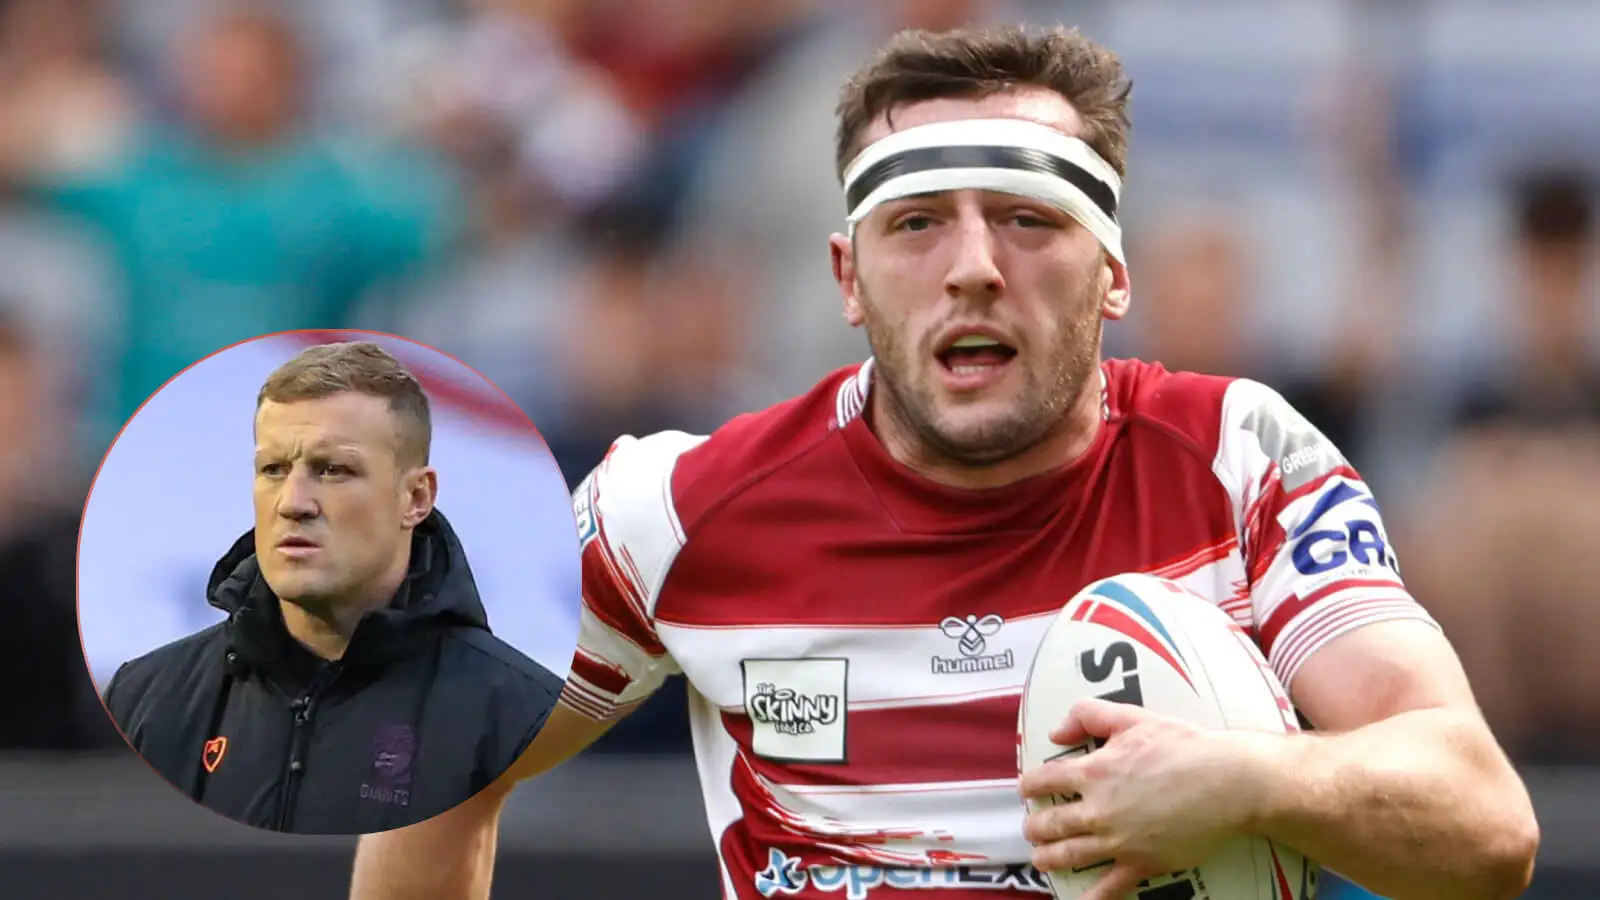 Pundit gushes over ‘unbelievable’ Wigan Warriors centre, labelling star one of Super League’s form players